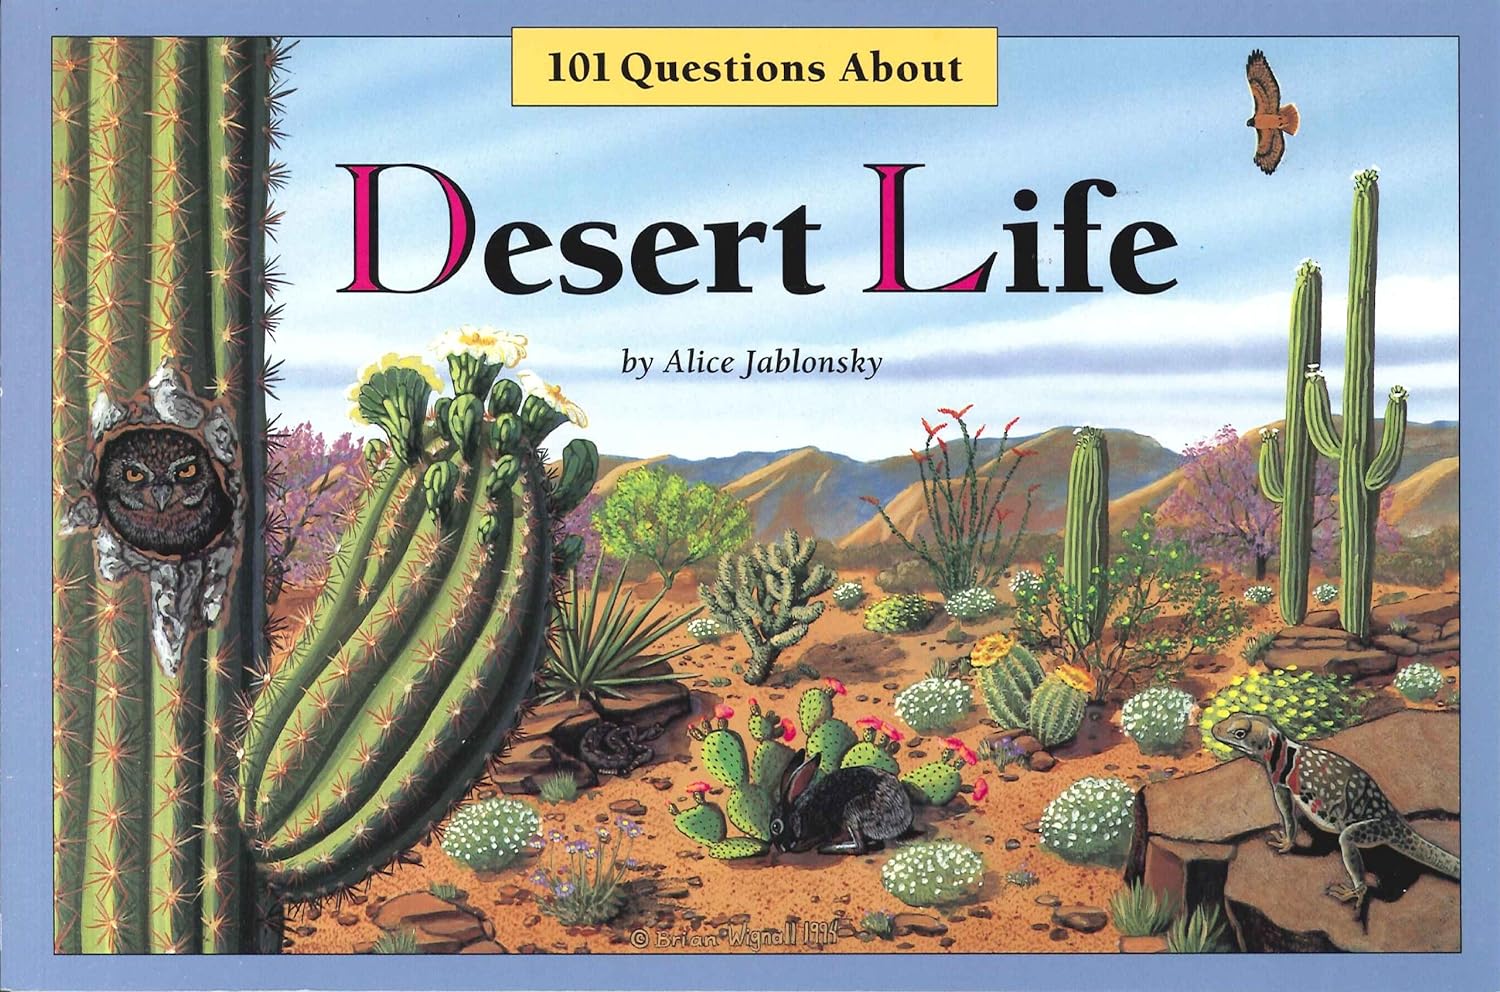 101 Questions About Desert Life Paperback Book